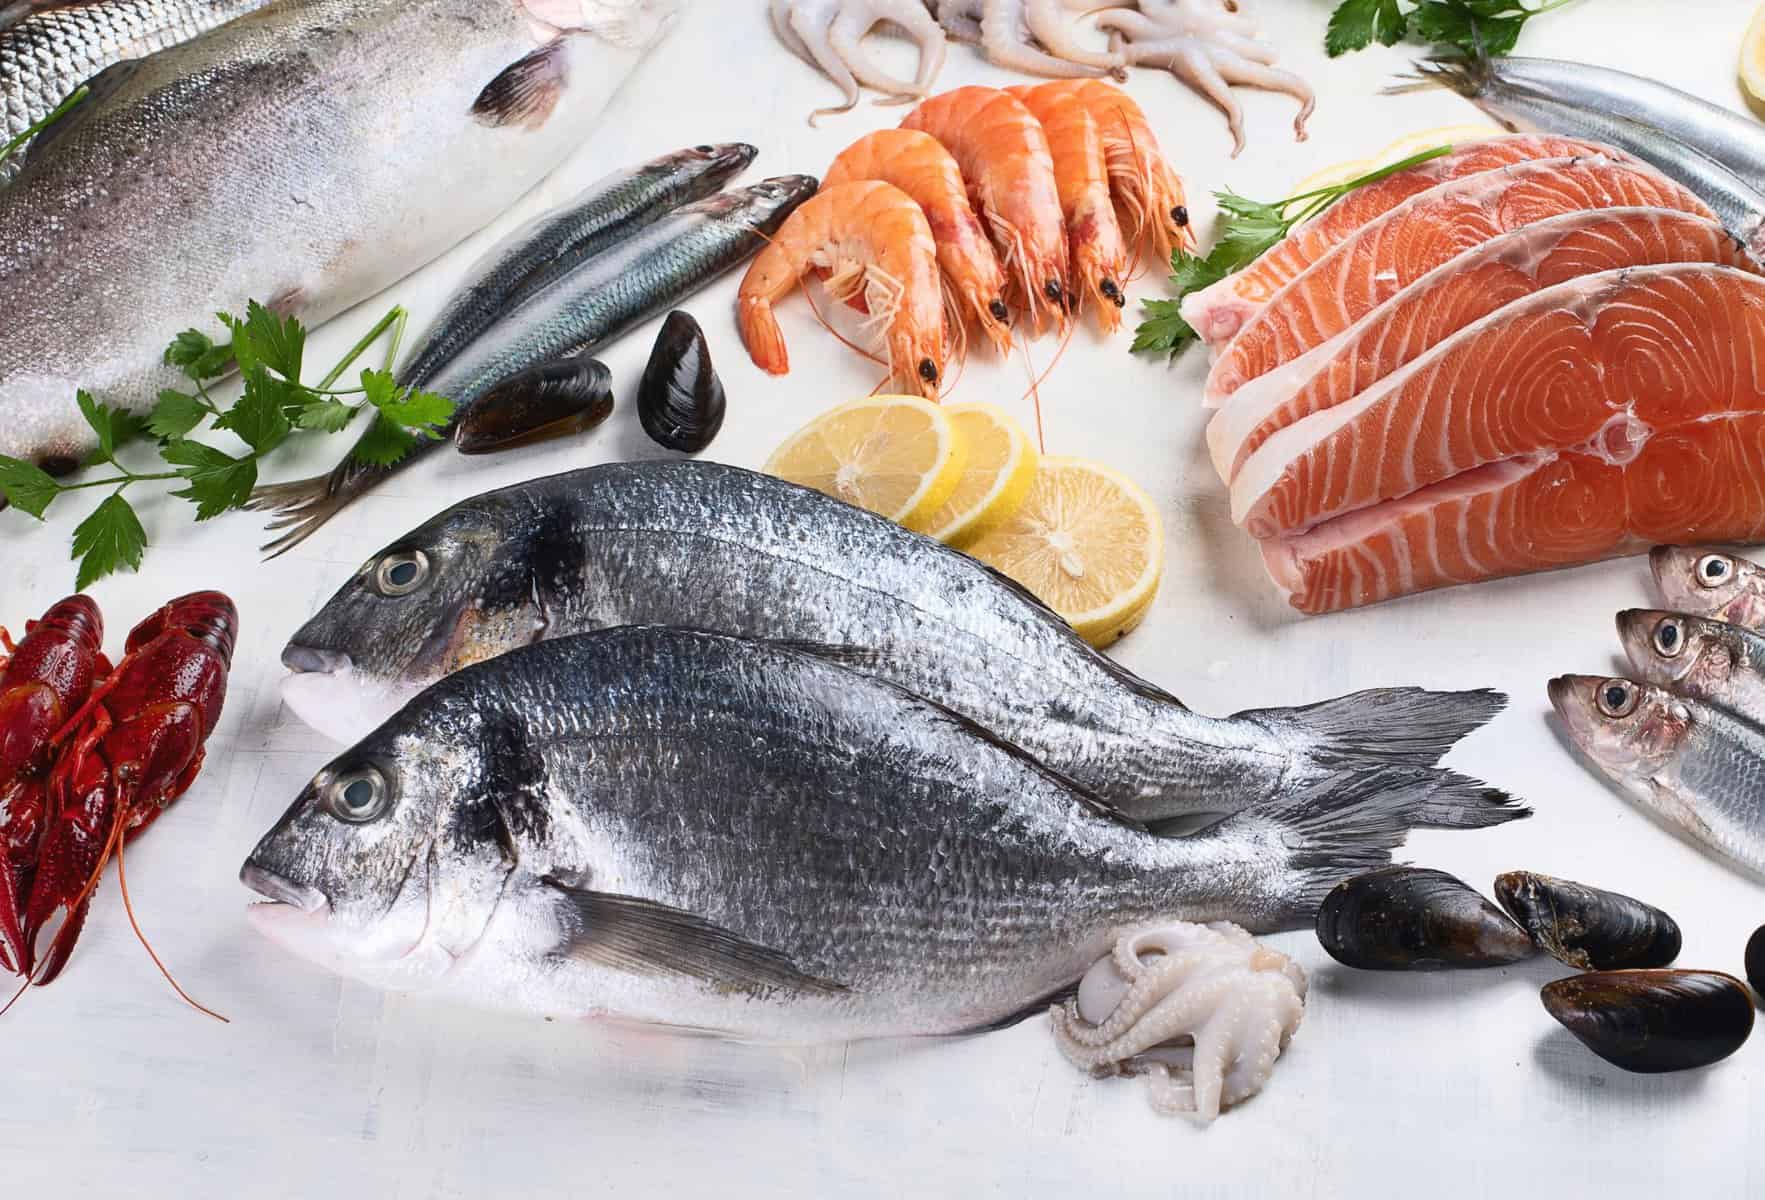 High Mercury Fish and Pregnancy - The Healthy Eating Clinic